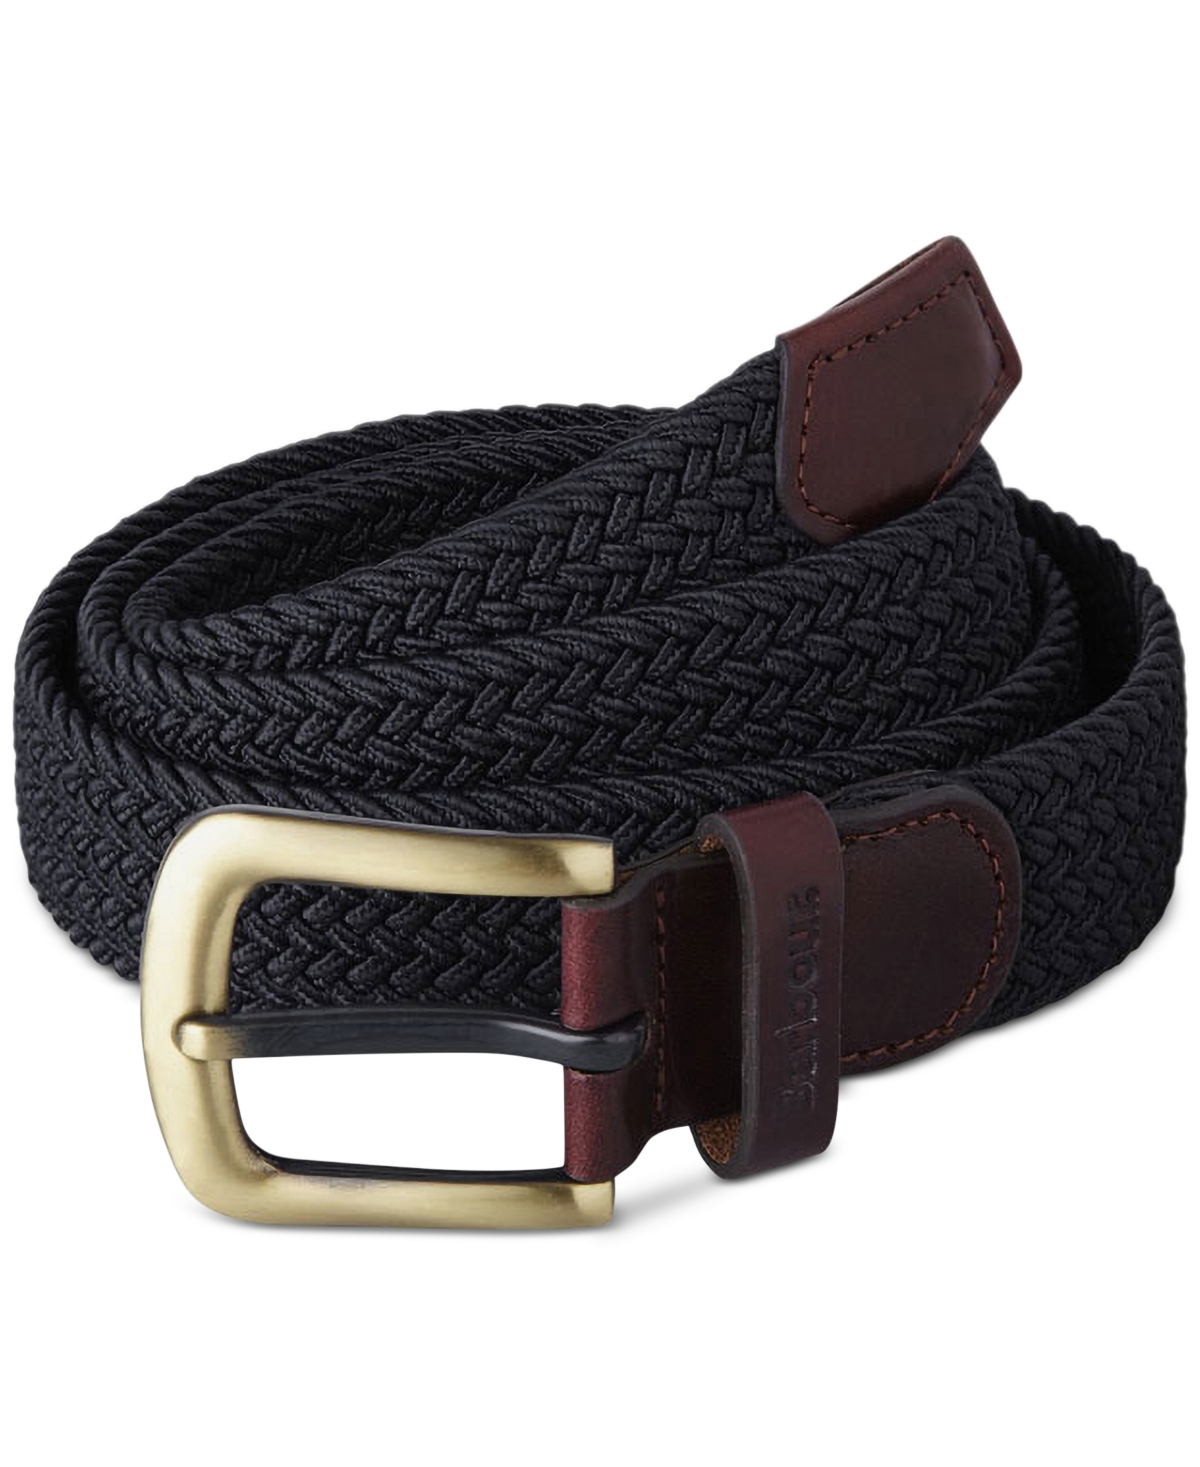 Men's Stretch Webbing Belt with Faux-Leather Trim - Navy